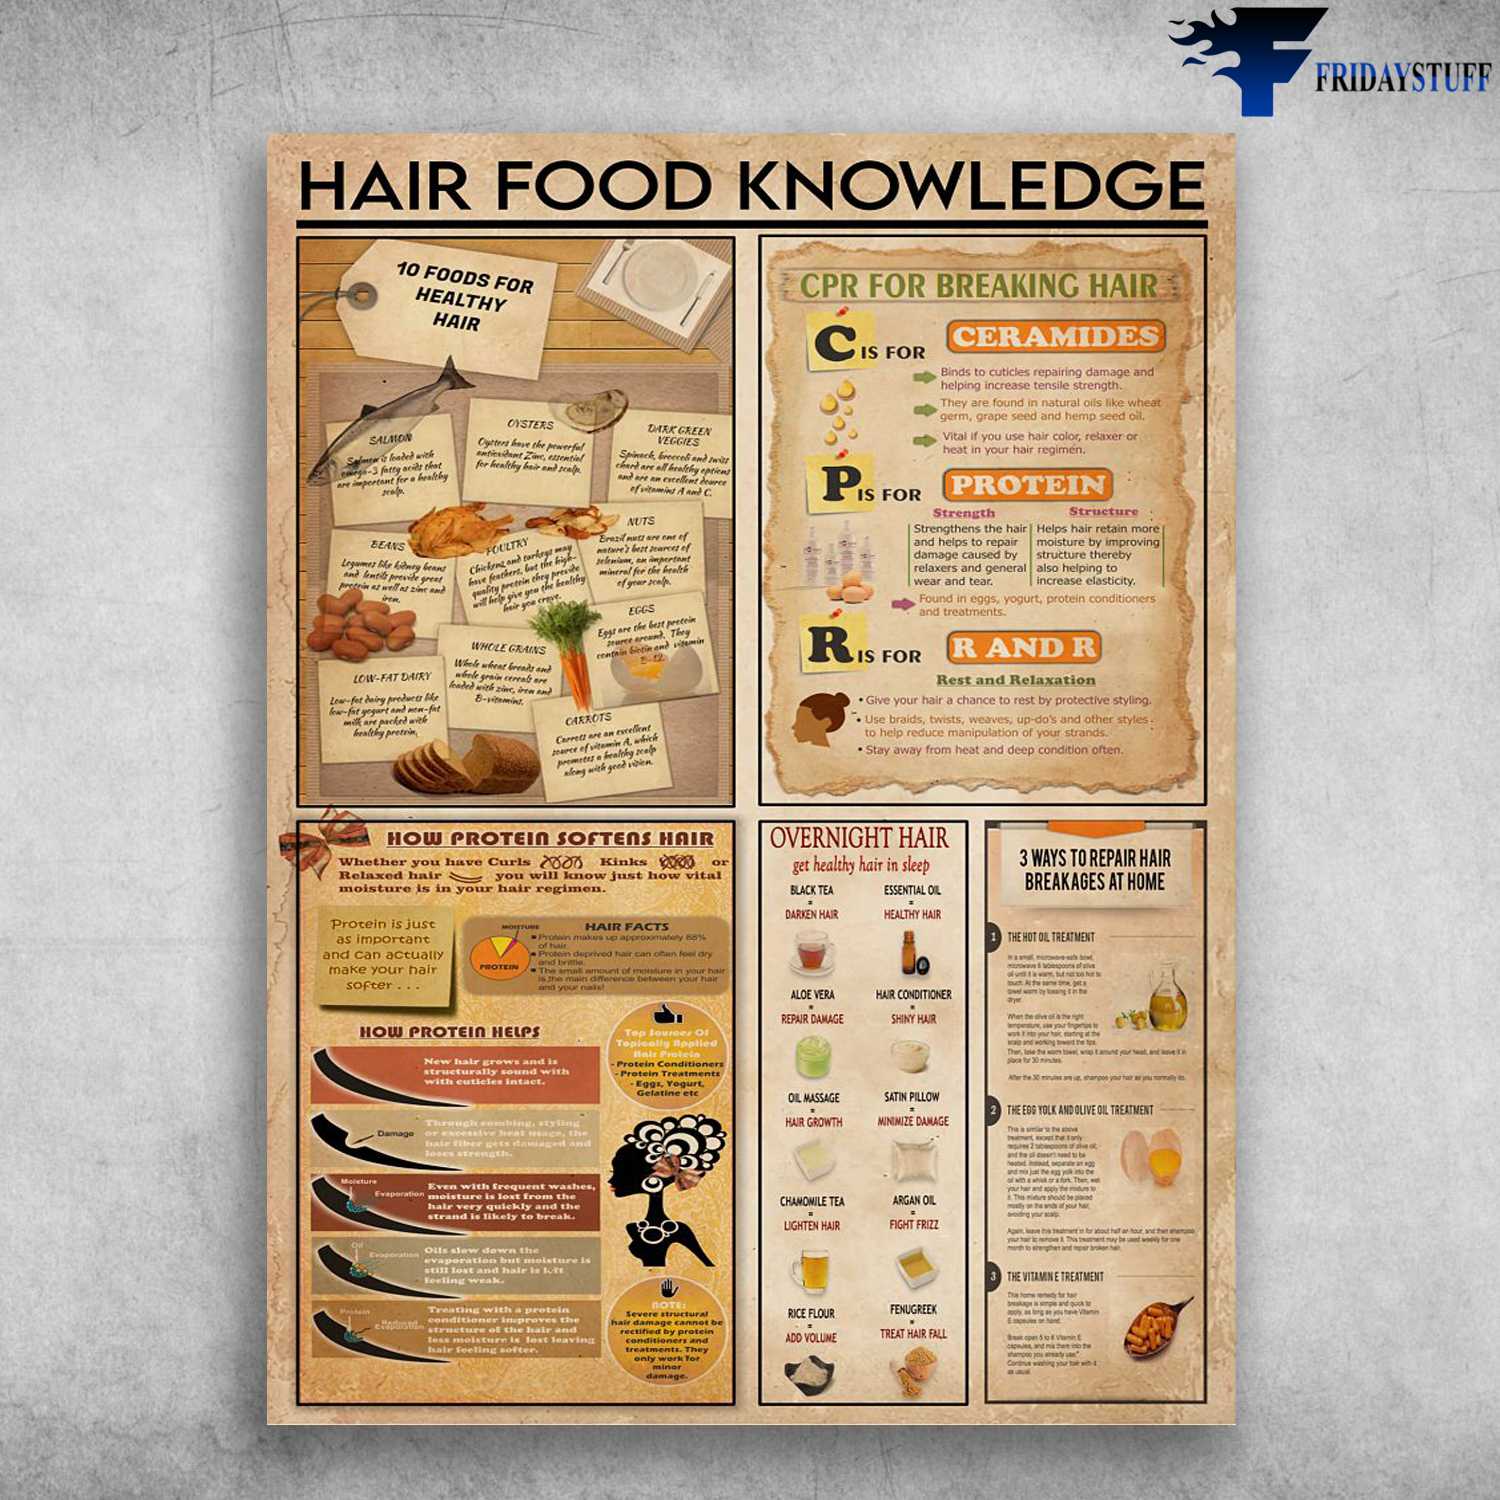 Hair Food Knowledge, Hair Care - 10 Foods For Healthy Hair, CPR For Breaking Hair, How Protein Softens Hair